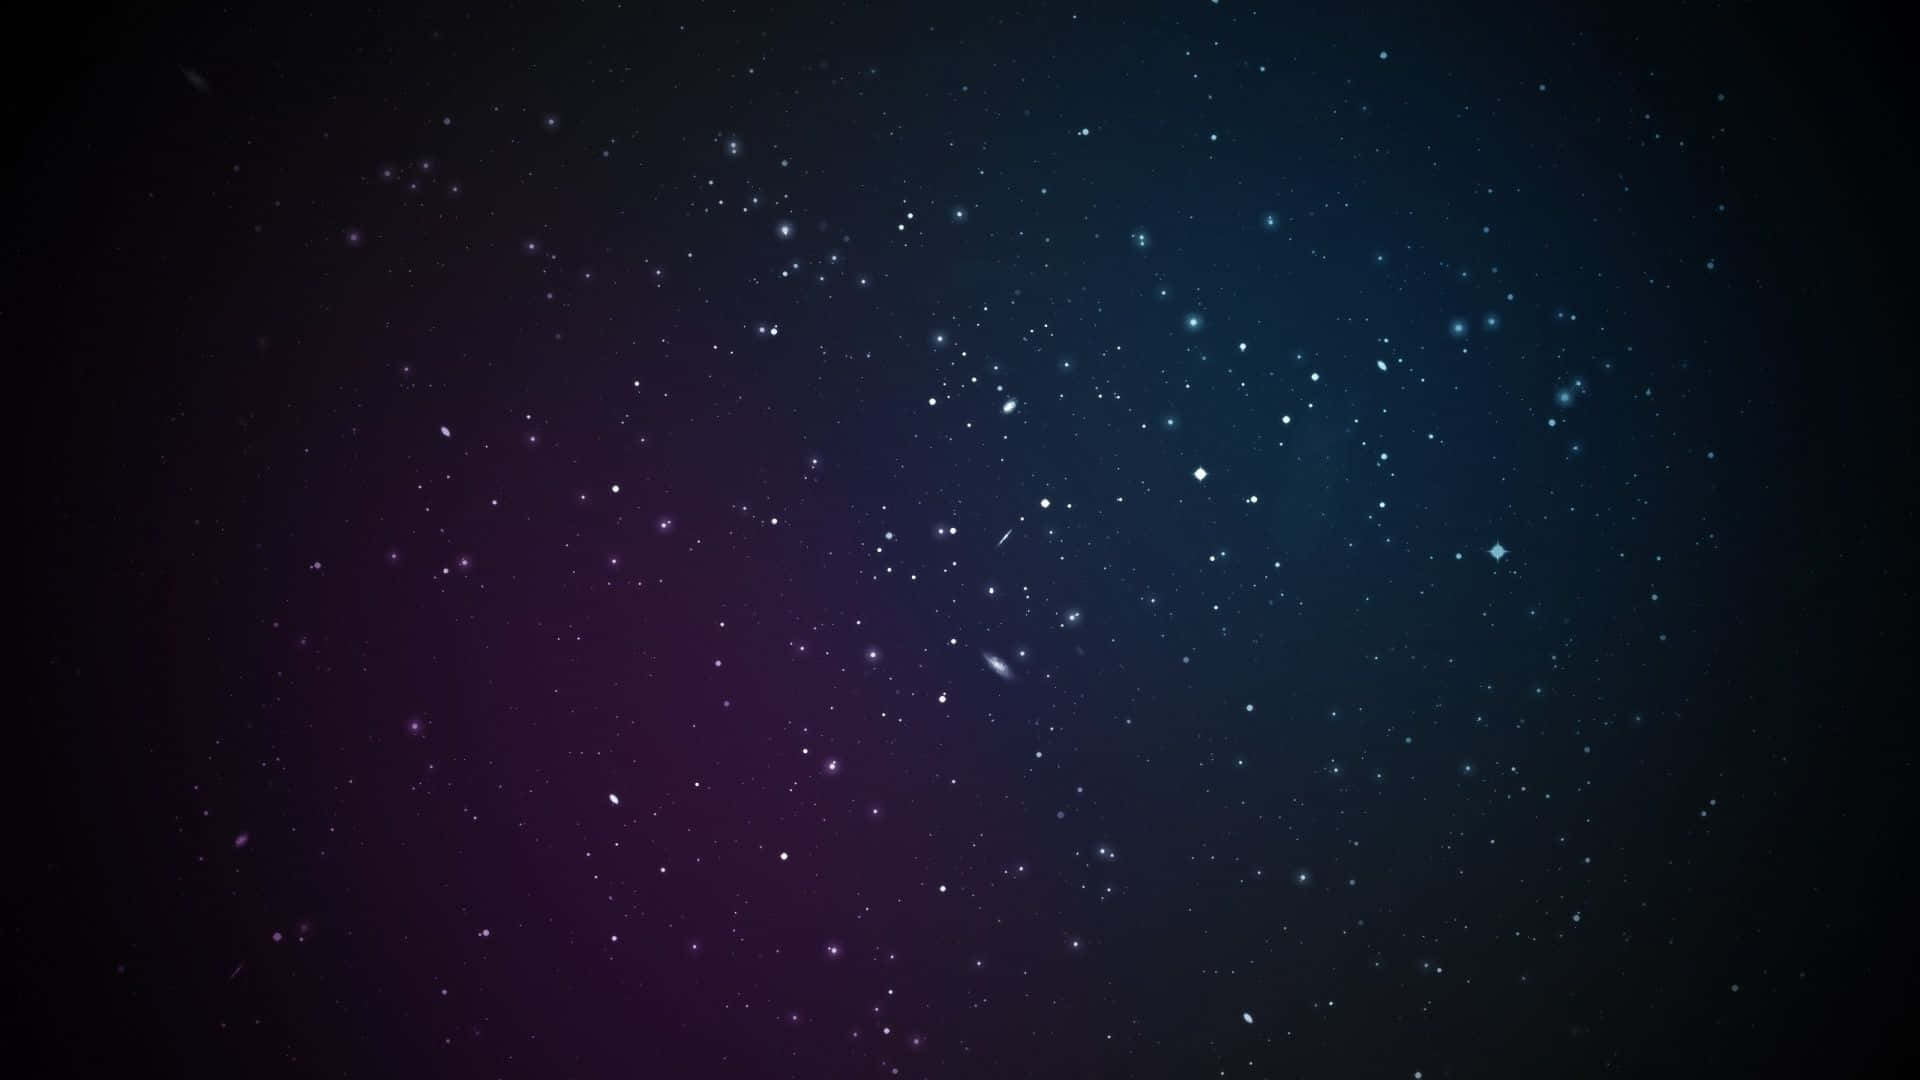 A night sky illuminated by countless stars, creating a beautiful aesthetic in the sky Wallpaper